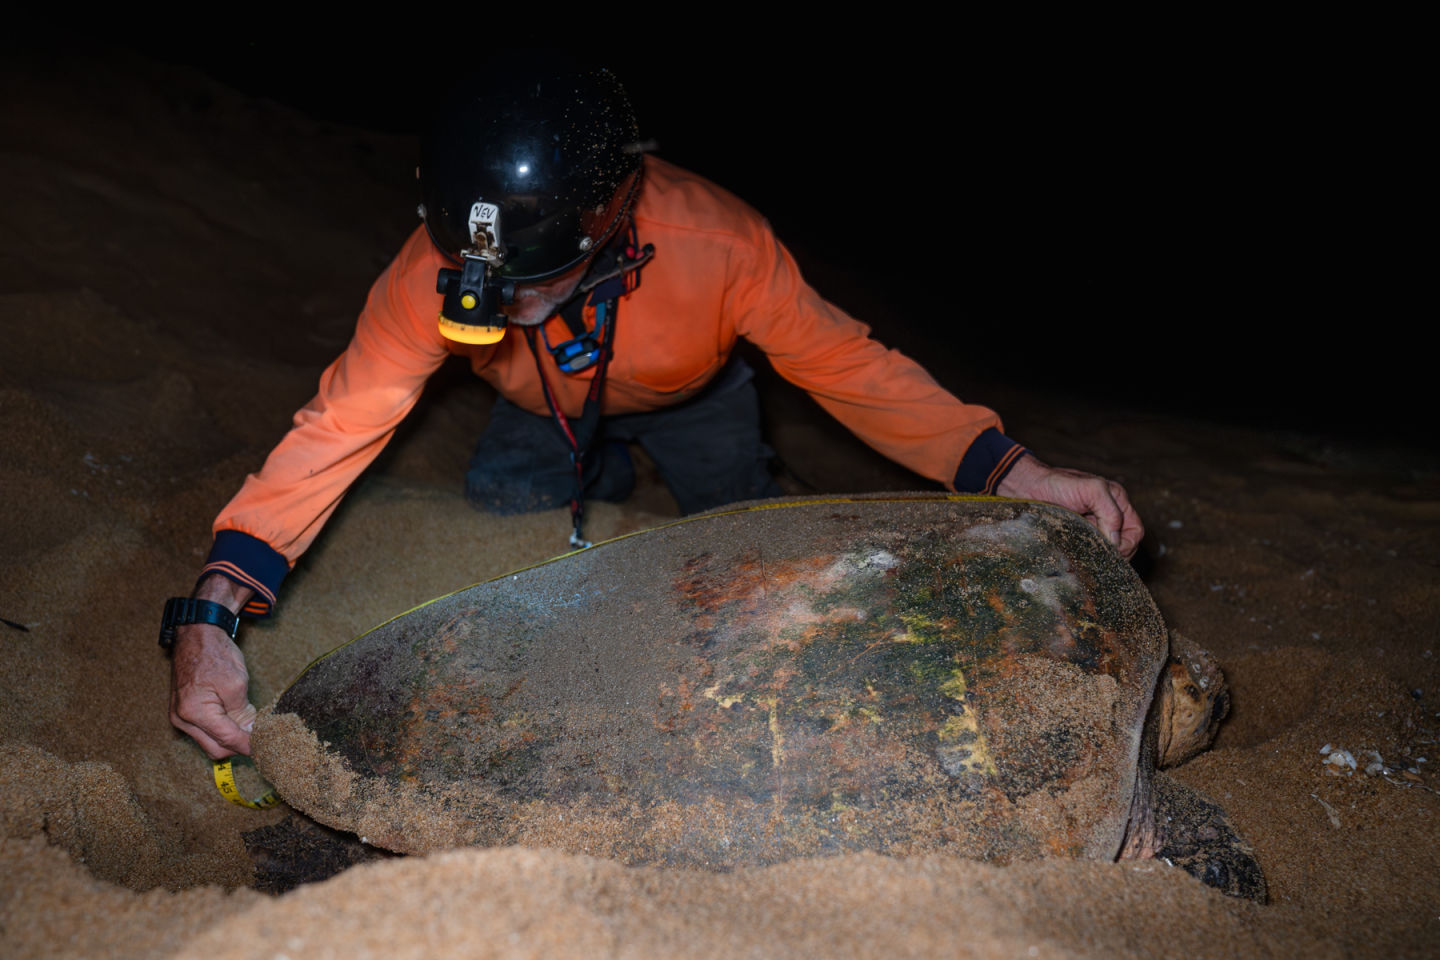 Nev measuring the carapace of a nesting loggerhead turtle. Credit: Ben and Di